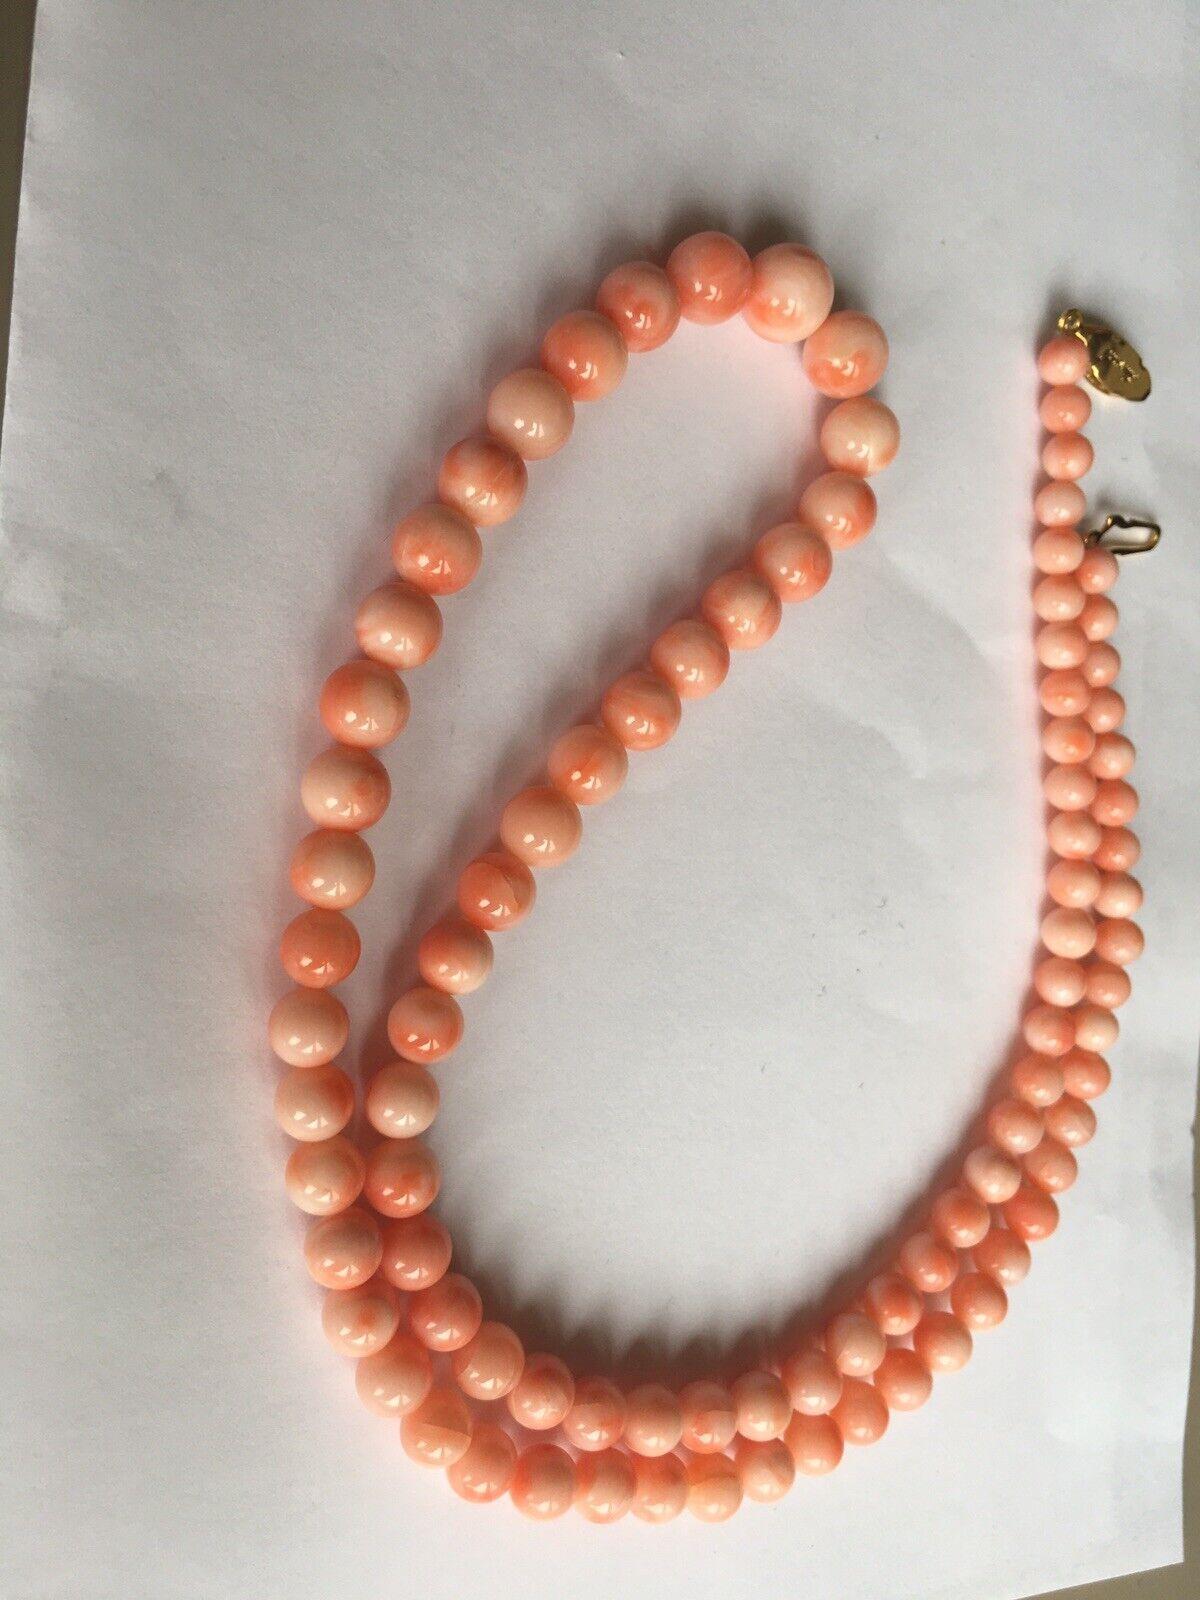 GRADUATED ANGEL SKIN CORAL NECKLACE Very fresh condition old stuck Graduated angel skin coal necklace apppx 25.5 inch long with graduated polished Coral beads ranging in size from appx 9.6 mm- 5.5 mm, gold tone fishhook clasp closure , 43